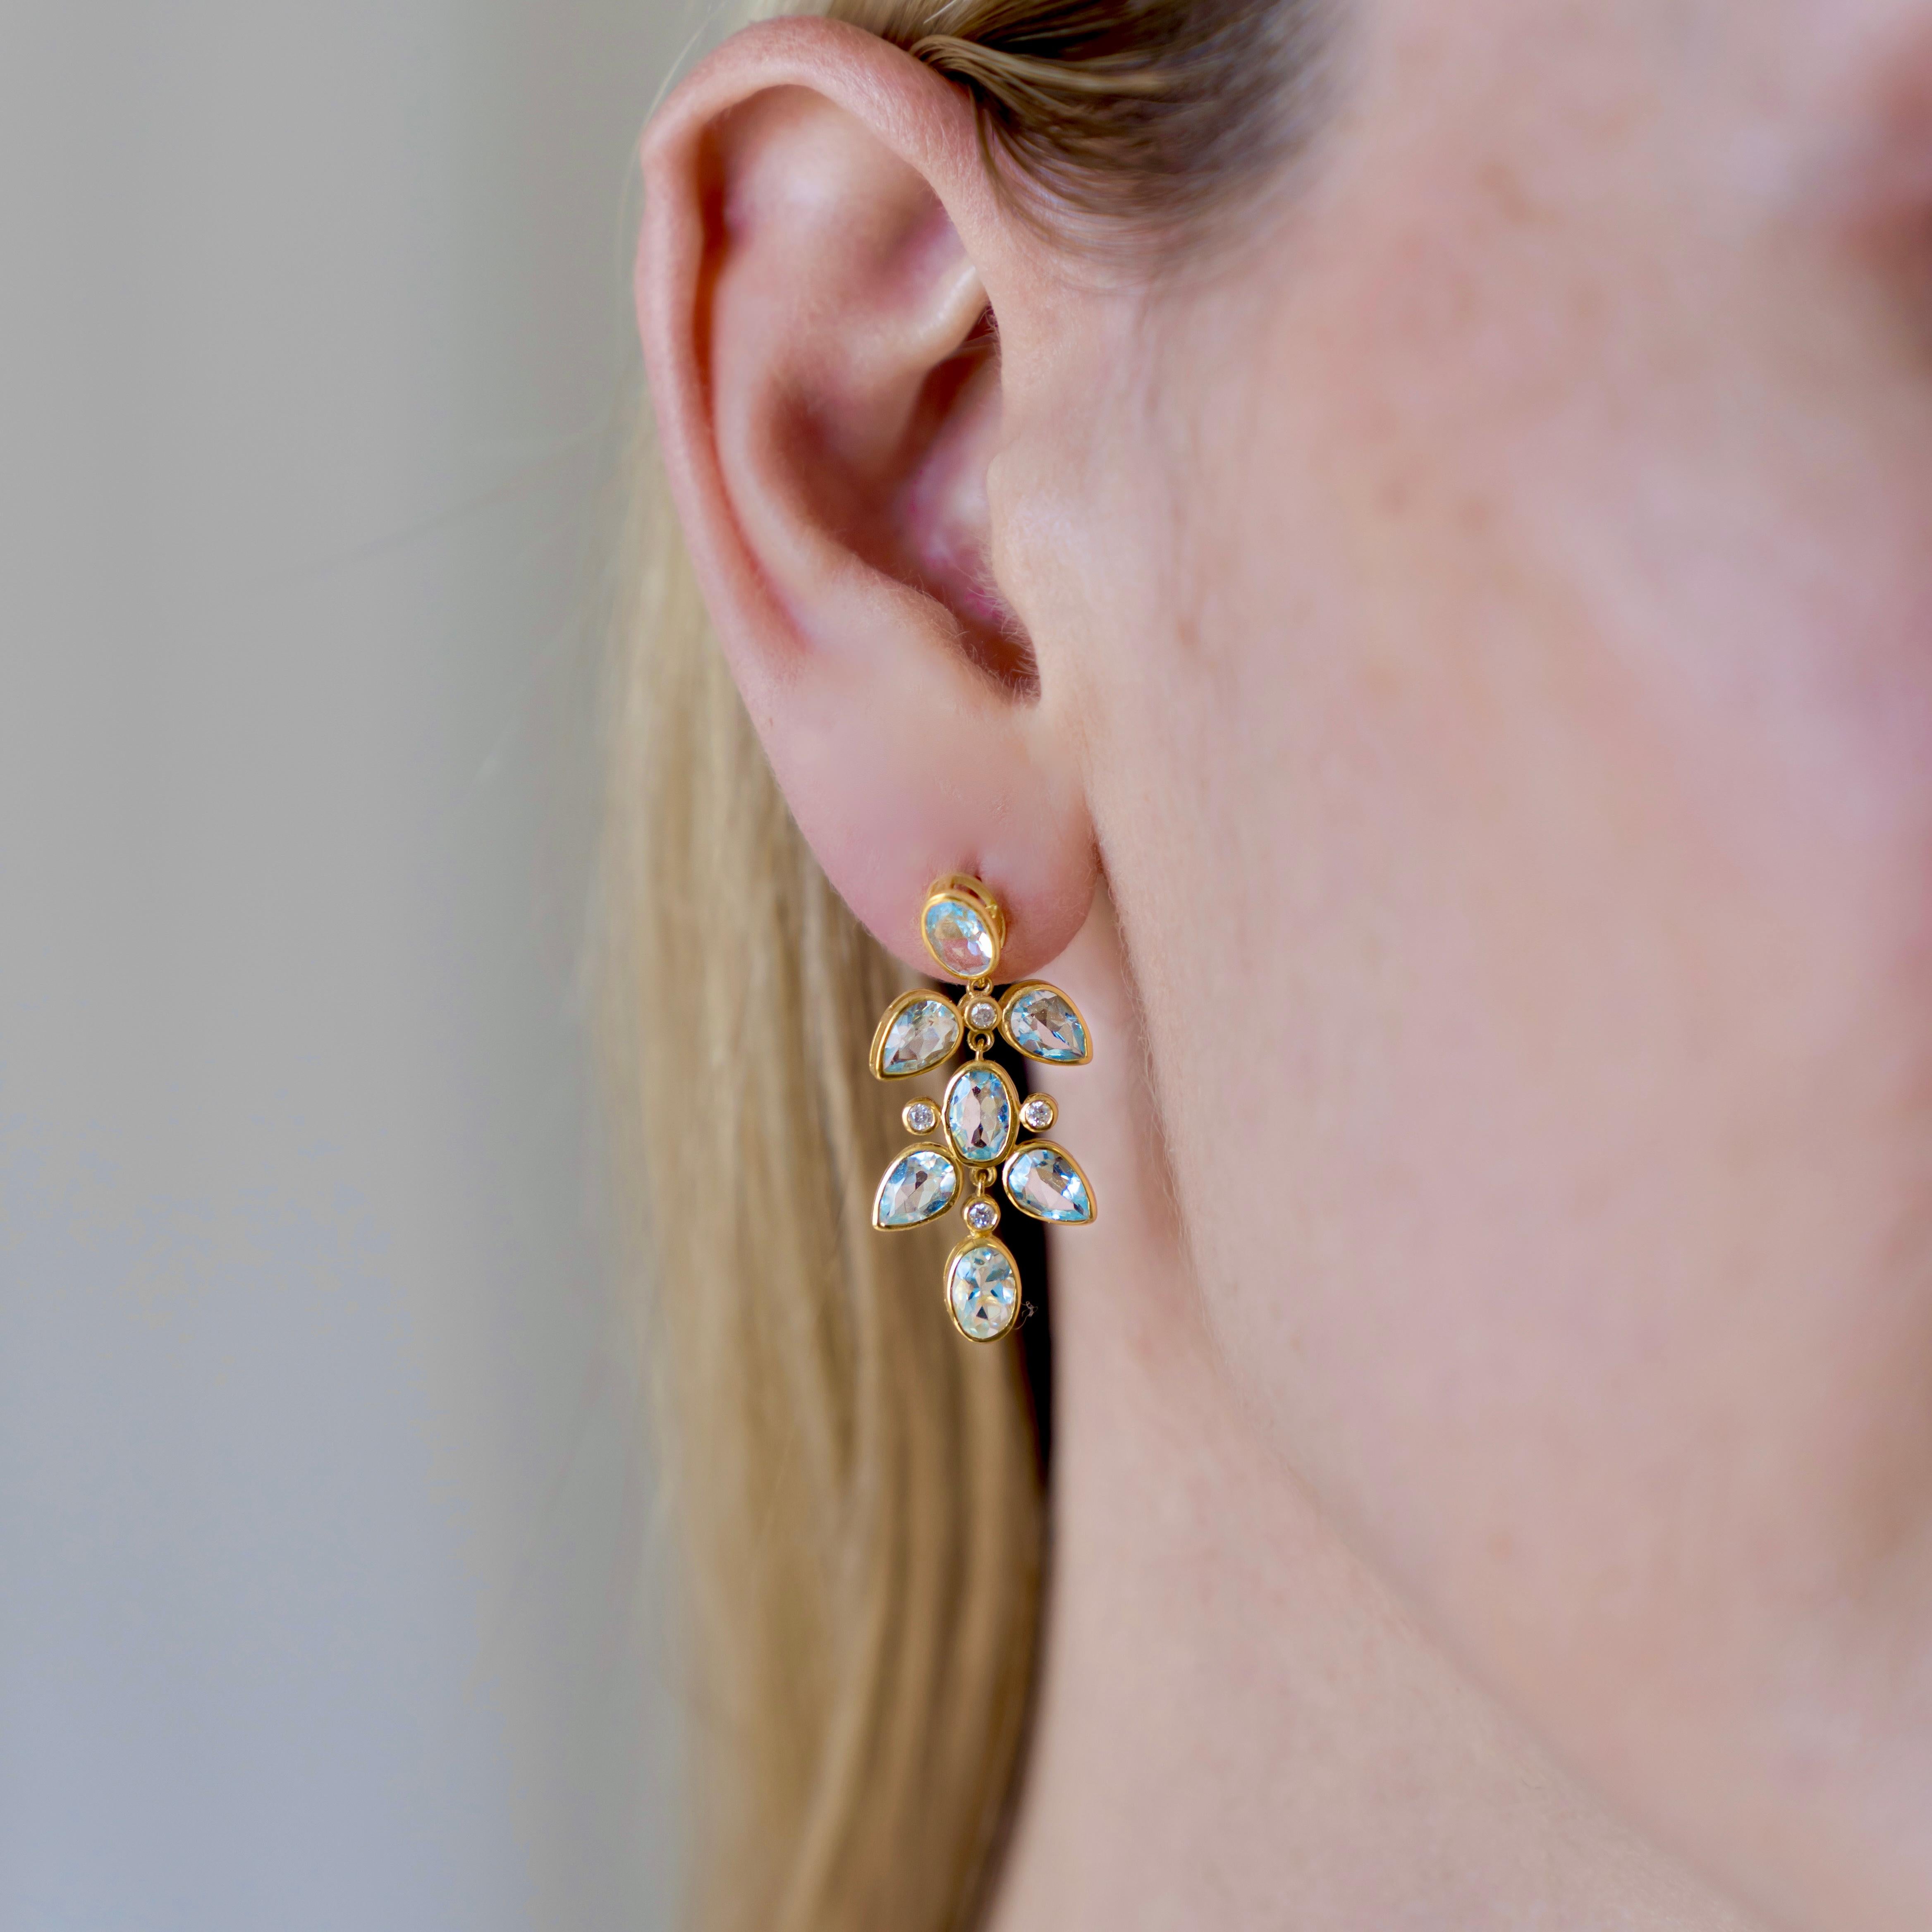 Nina Zhou's Aquamarine Diamond Drop Earrings, beautifully crafted in 14k yellow gold. Each earring showcases stunning aquamarine gemstones, revered for the clear, oceanic blue that evokes a sense of calm and clarity. These captivating stones are